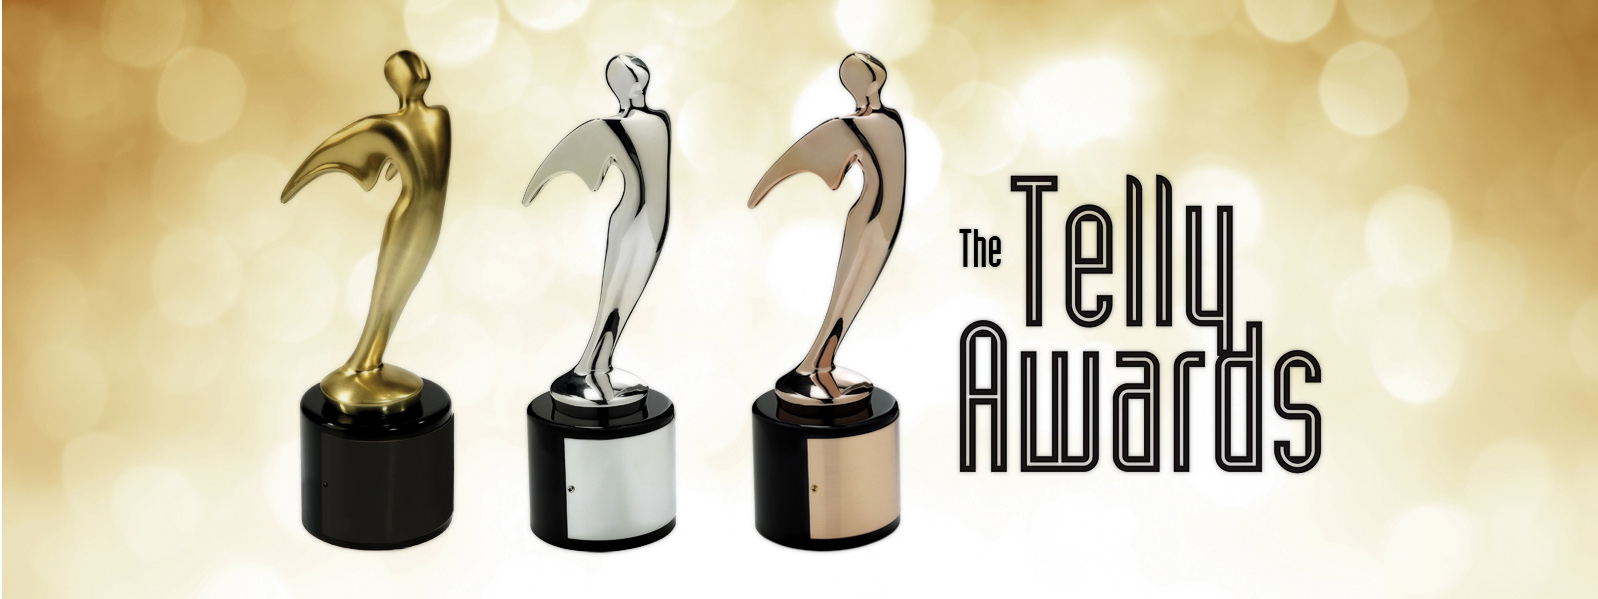 Winner in the 37th Annual Telly Awards